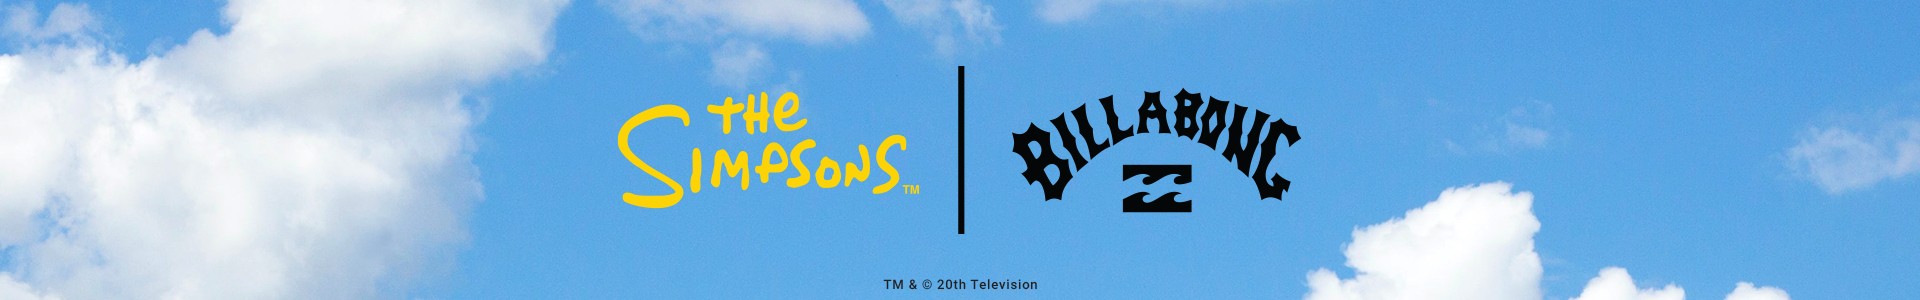 The Simpsons x Billabong Collection